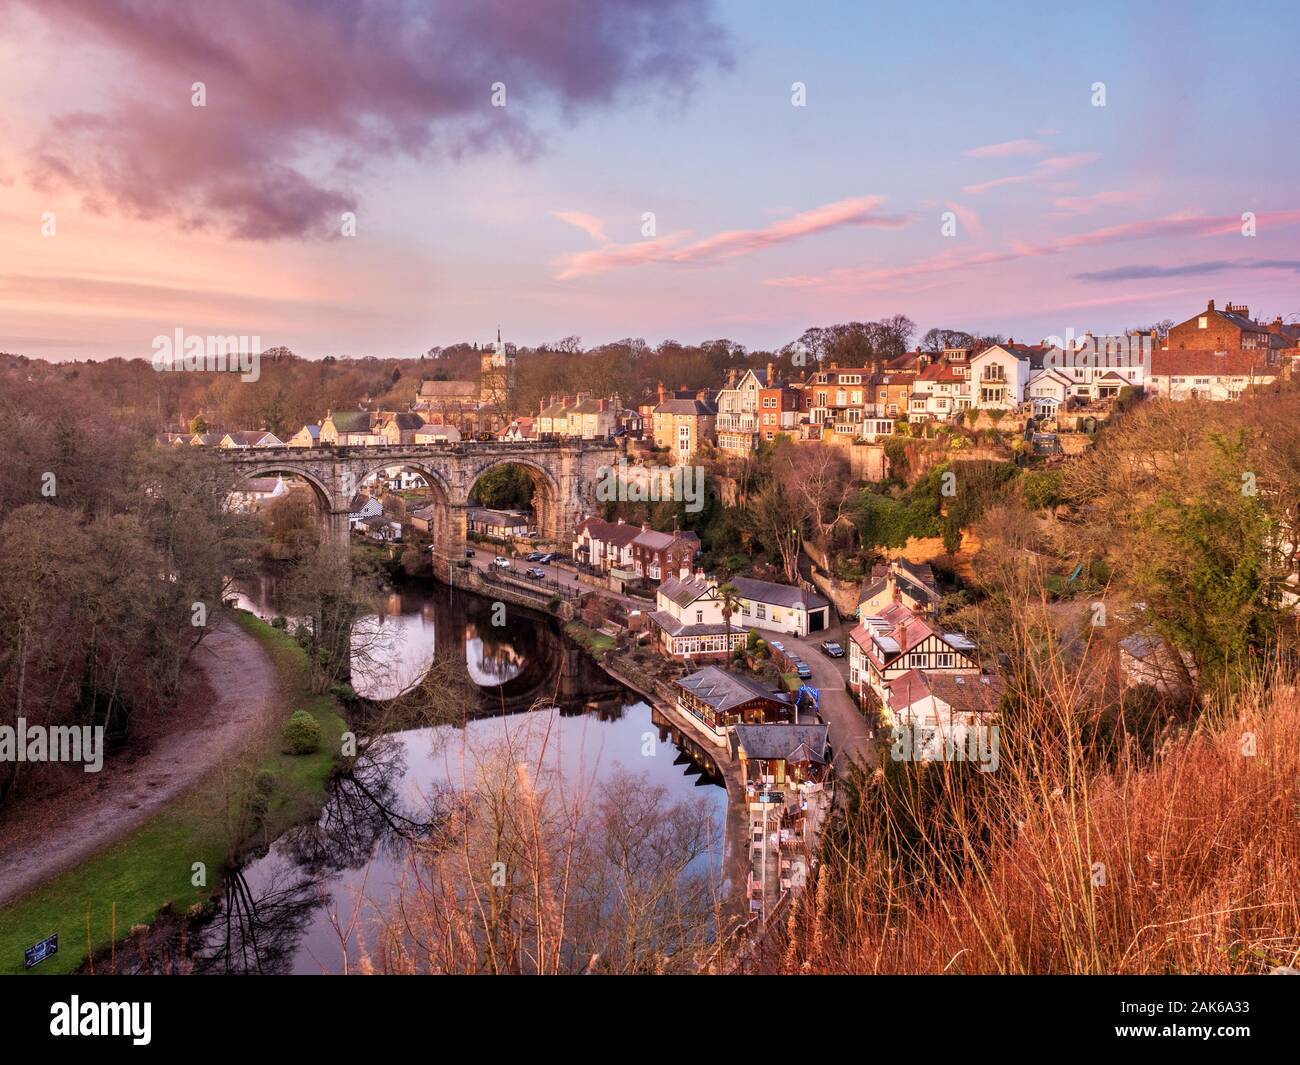 Railway Viaduct over the River Nidd at dusk from the Castle Grounds in Knaresborough North Yorkshire England Stock Photo